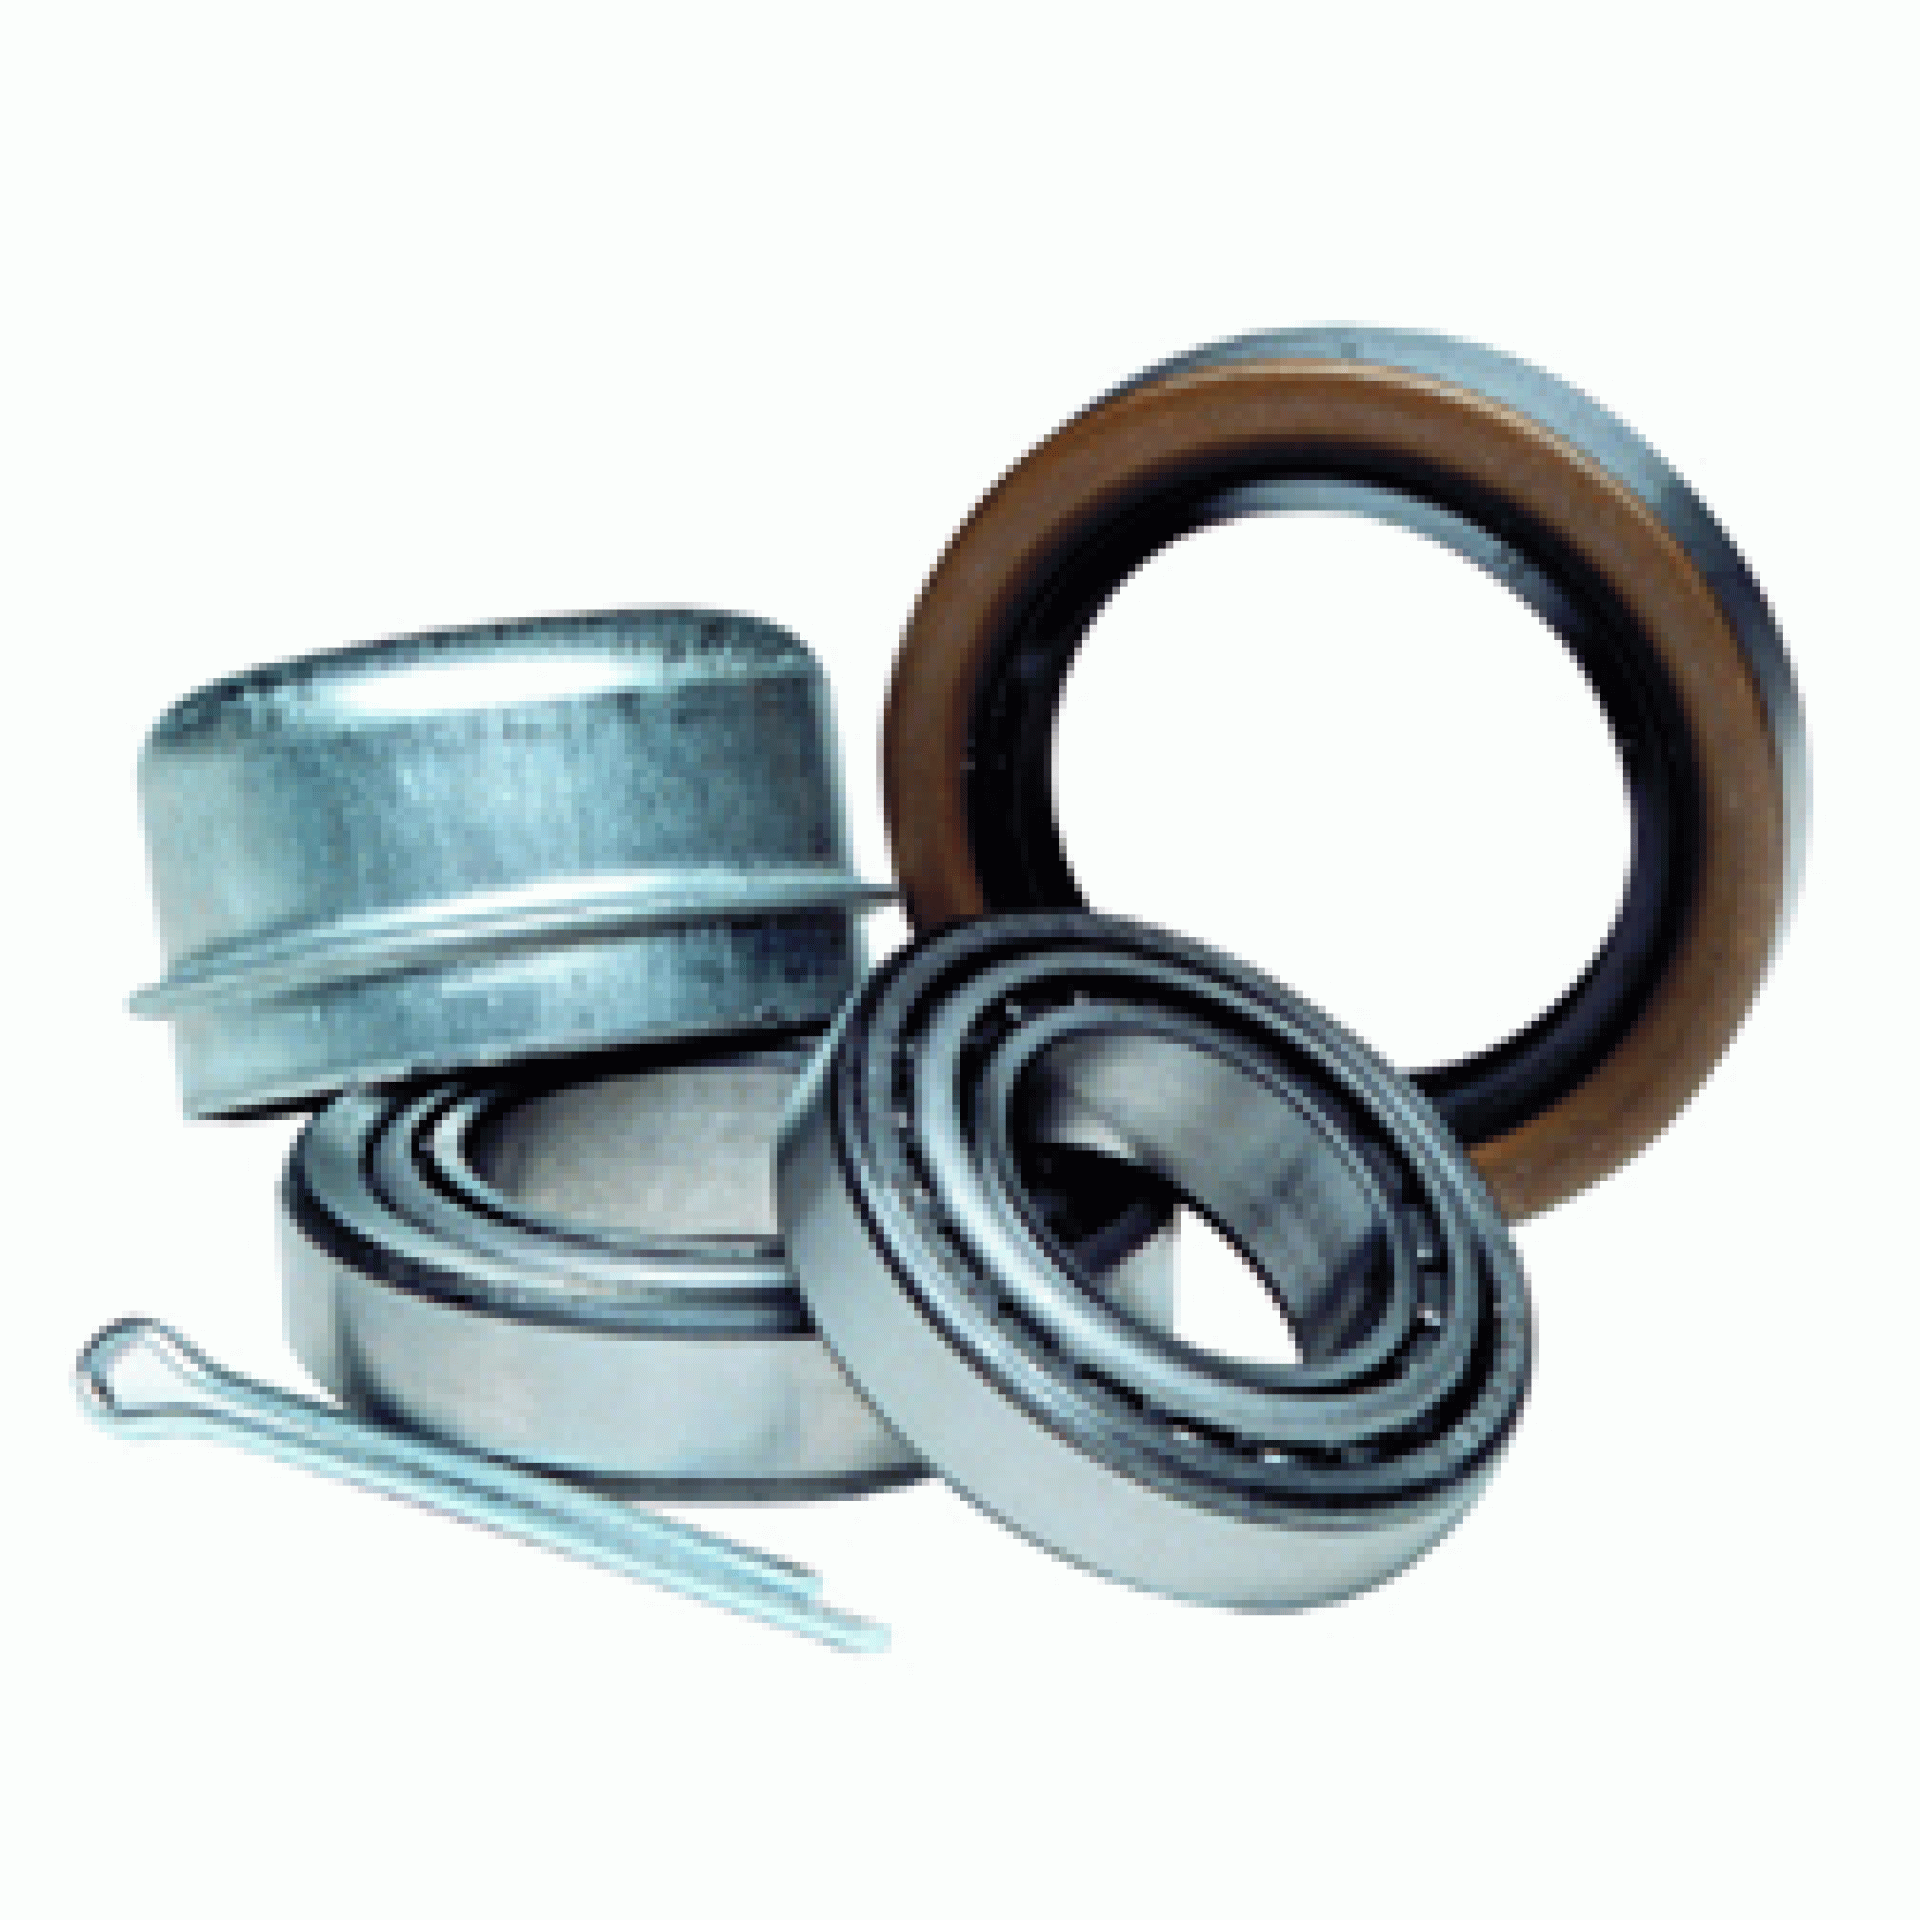 DEXTER MARINE PRODUCTS OF GEORGIA LC | K71-G02-31 | BEARING KIT- 1-3/8" STRAIGHT SPINDLE W/ DUST CAP L68149 CONE L68111 CUP